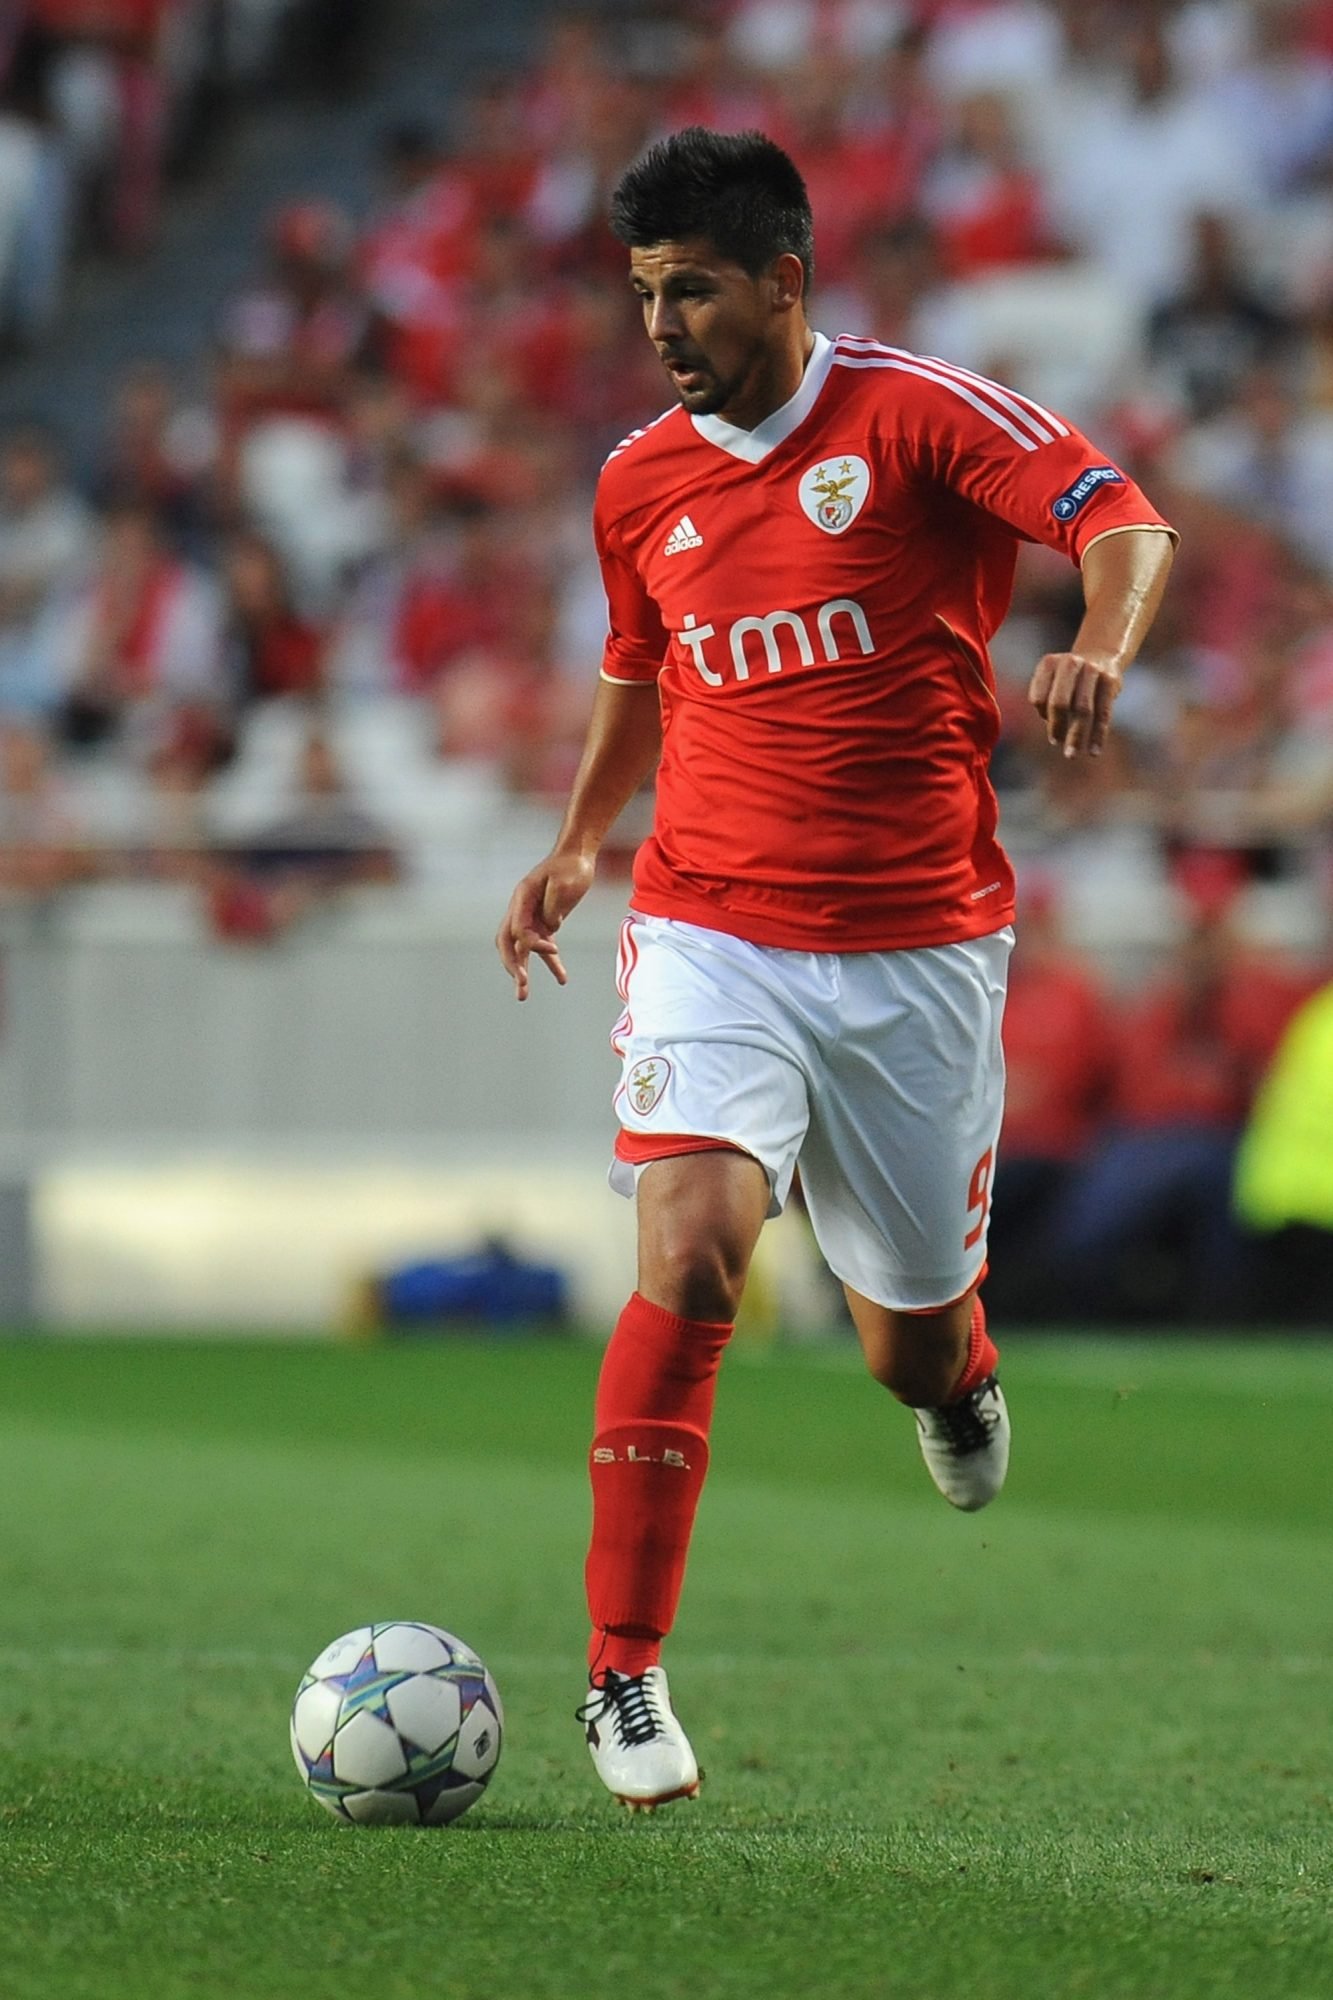 LISBON, PORTUGAL - AUGUST 24: Nolito of SL Benfica in action during the UEFA Champions League play-off second leg match between SL Benfica and FC Twente at Estadio da Luz on August 24, 2011 in Lisbon, Portugal. (Photo by Valerio Pennicino/Getty Images)